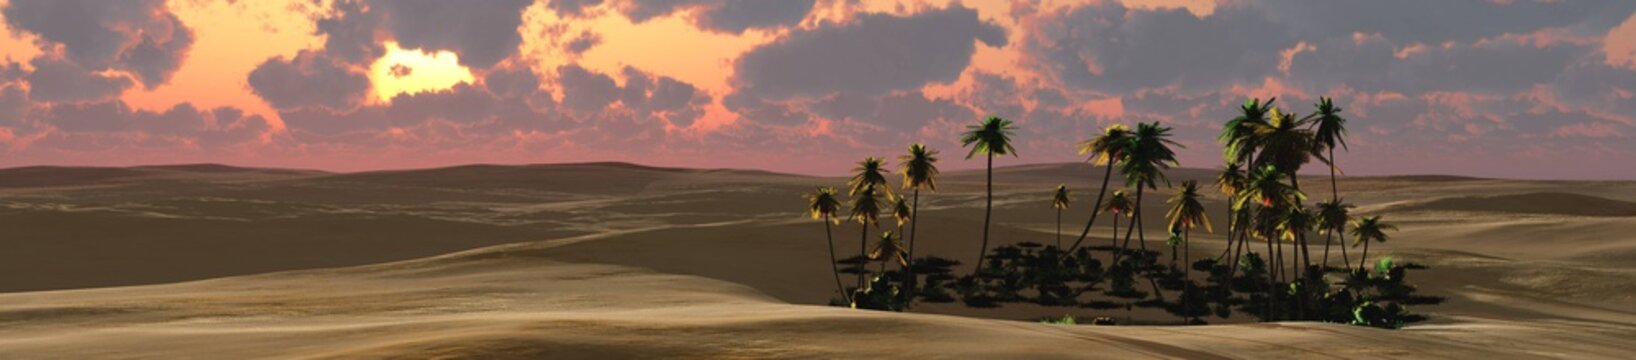 Oasis in the sandy desert against the sky with clouds,
3D rendering